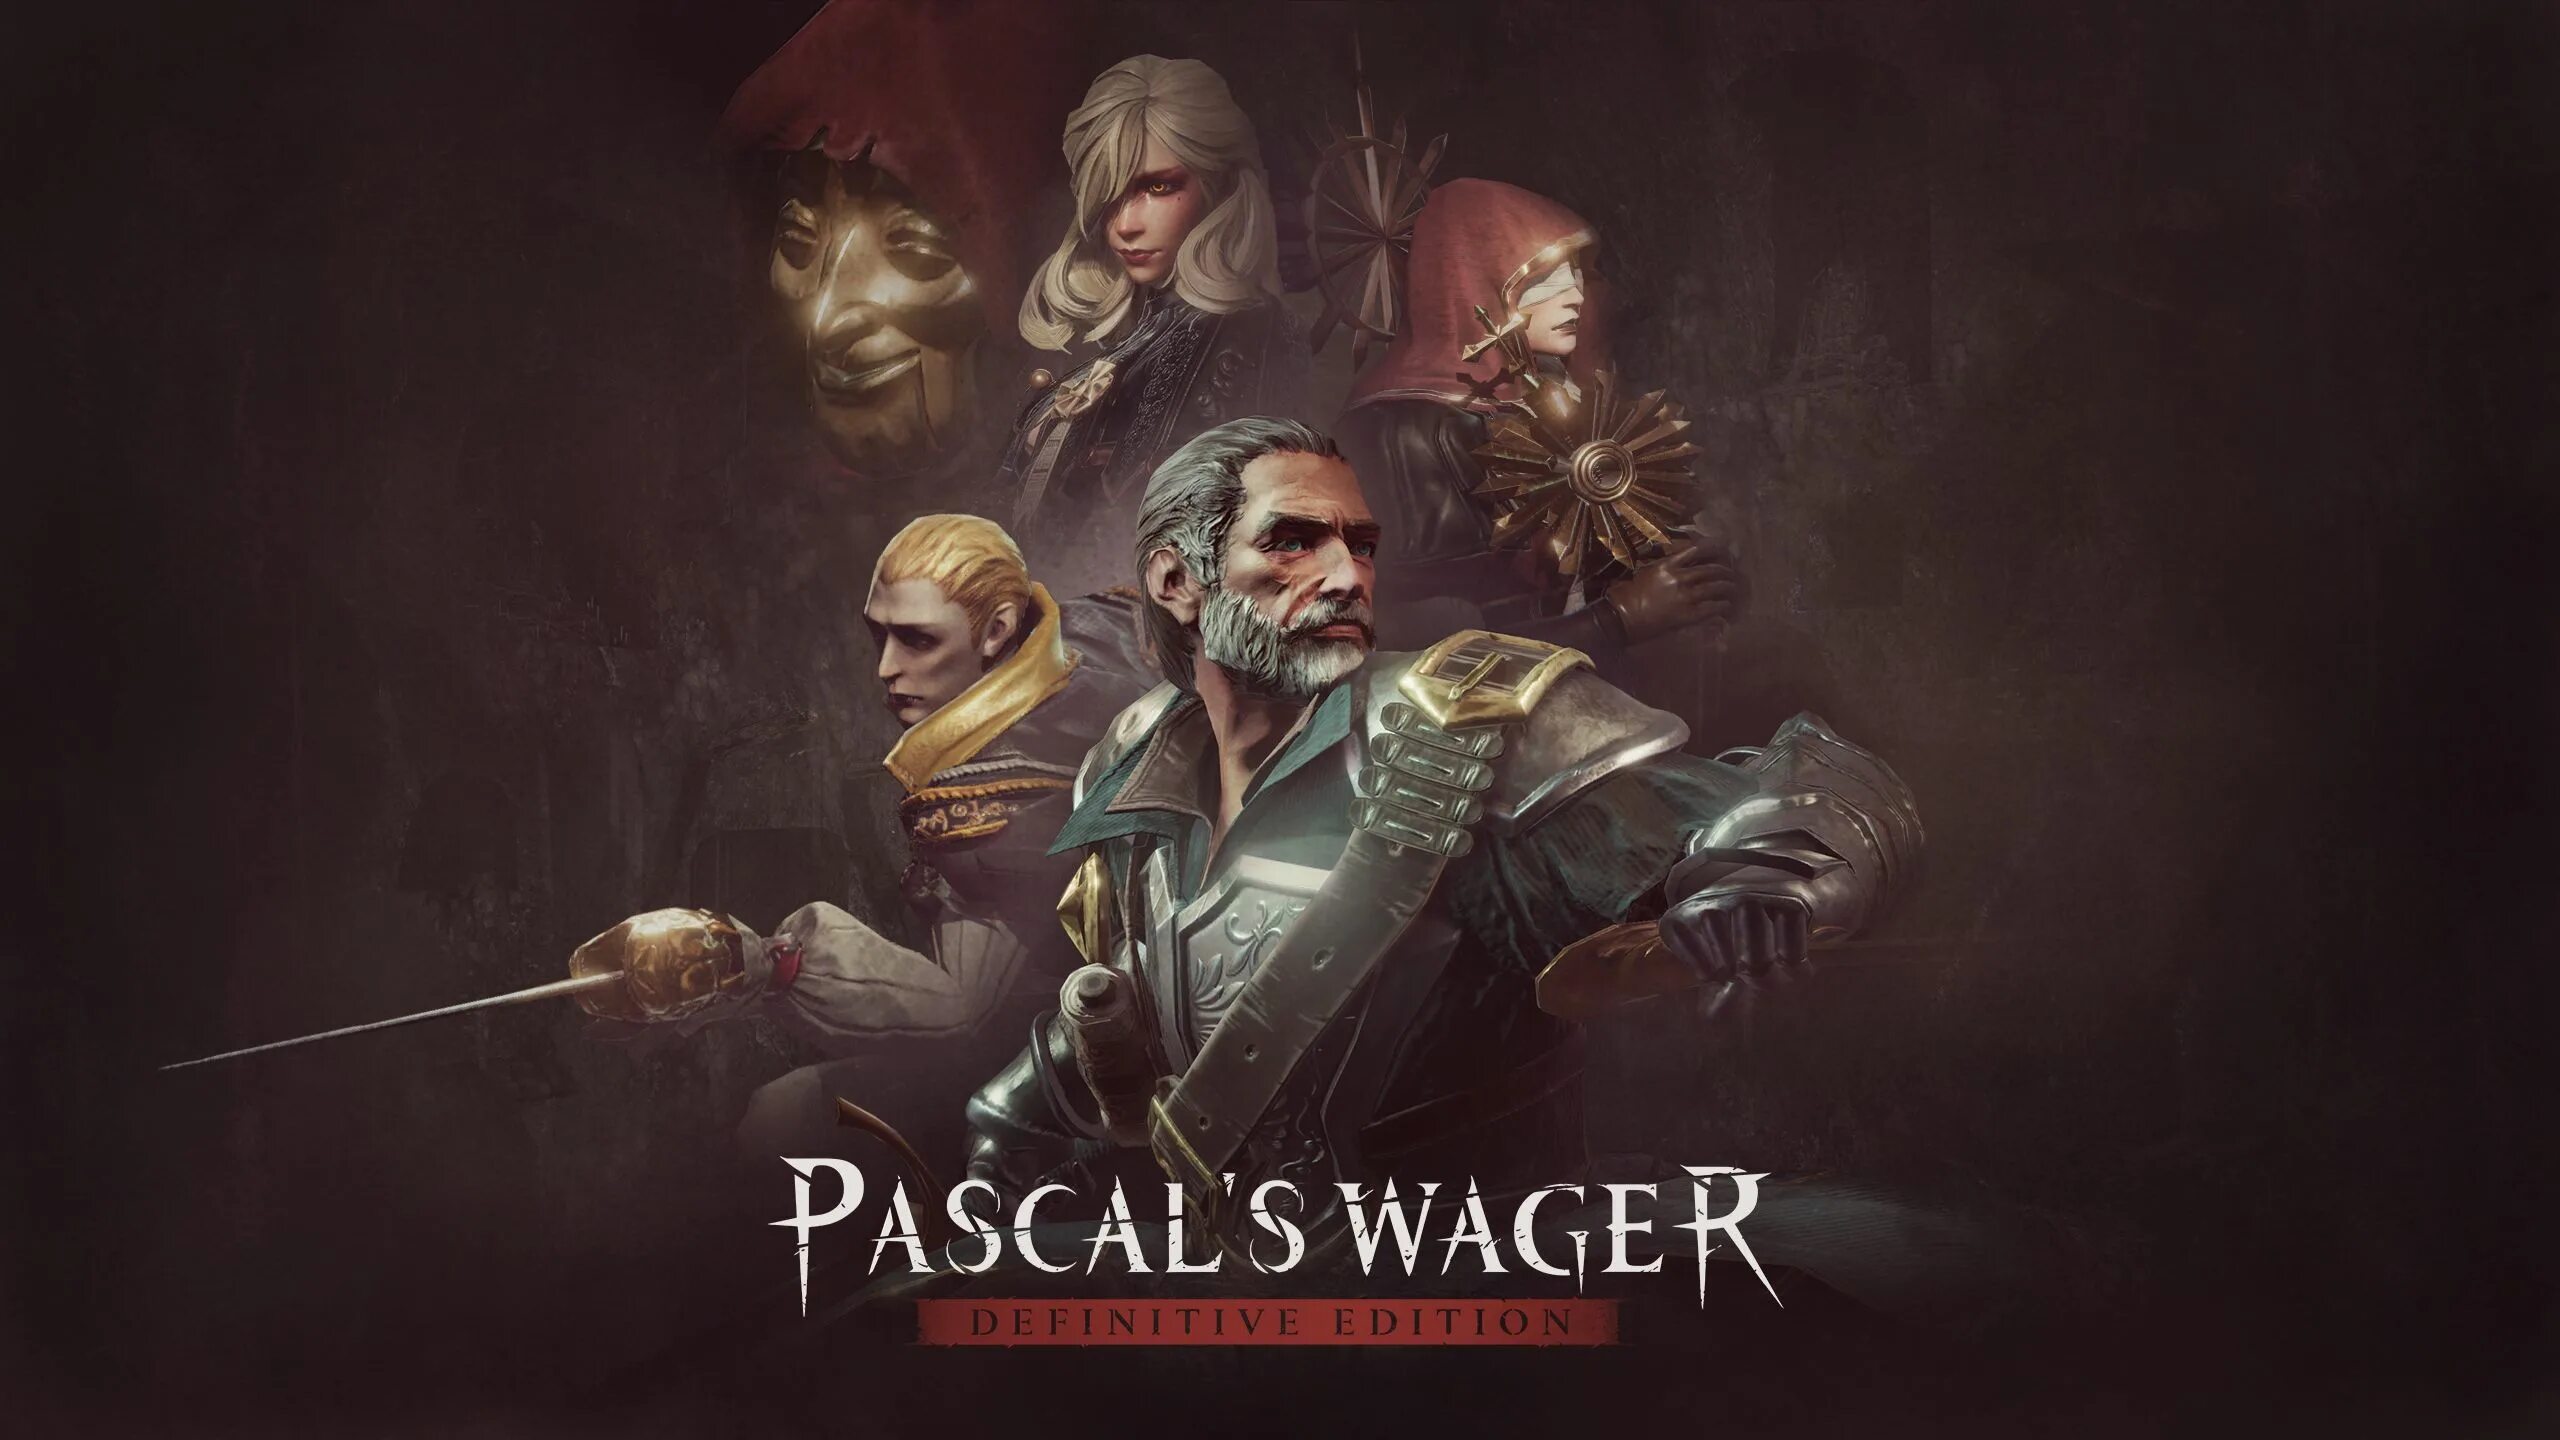 Pascal's Wager: Definitive Edition. Pascal's Wager: Definitive Edition (2021). Pascal Wager - 4pda. Pascal's Wager: Definitive Edition обложка. Pascal s wager кэш